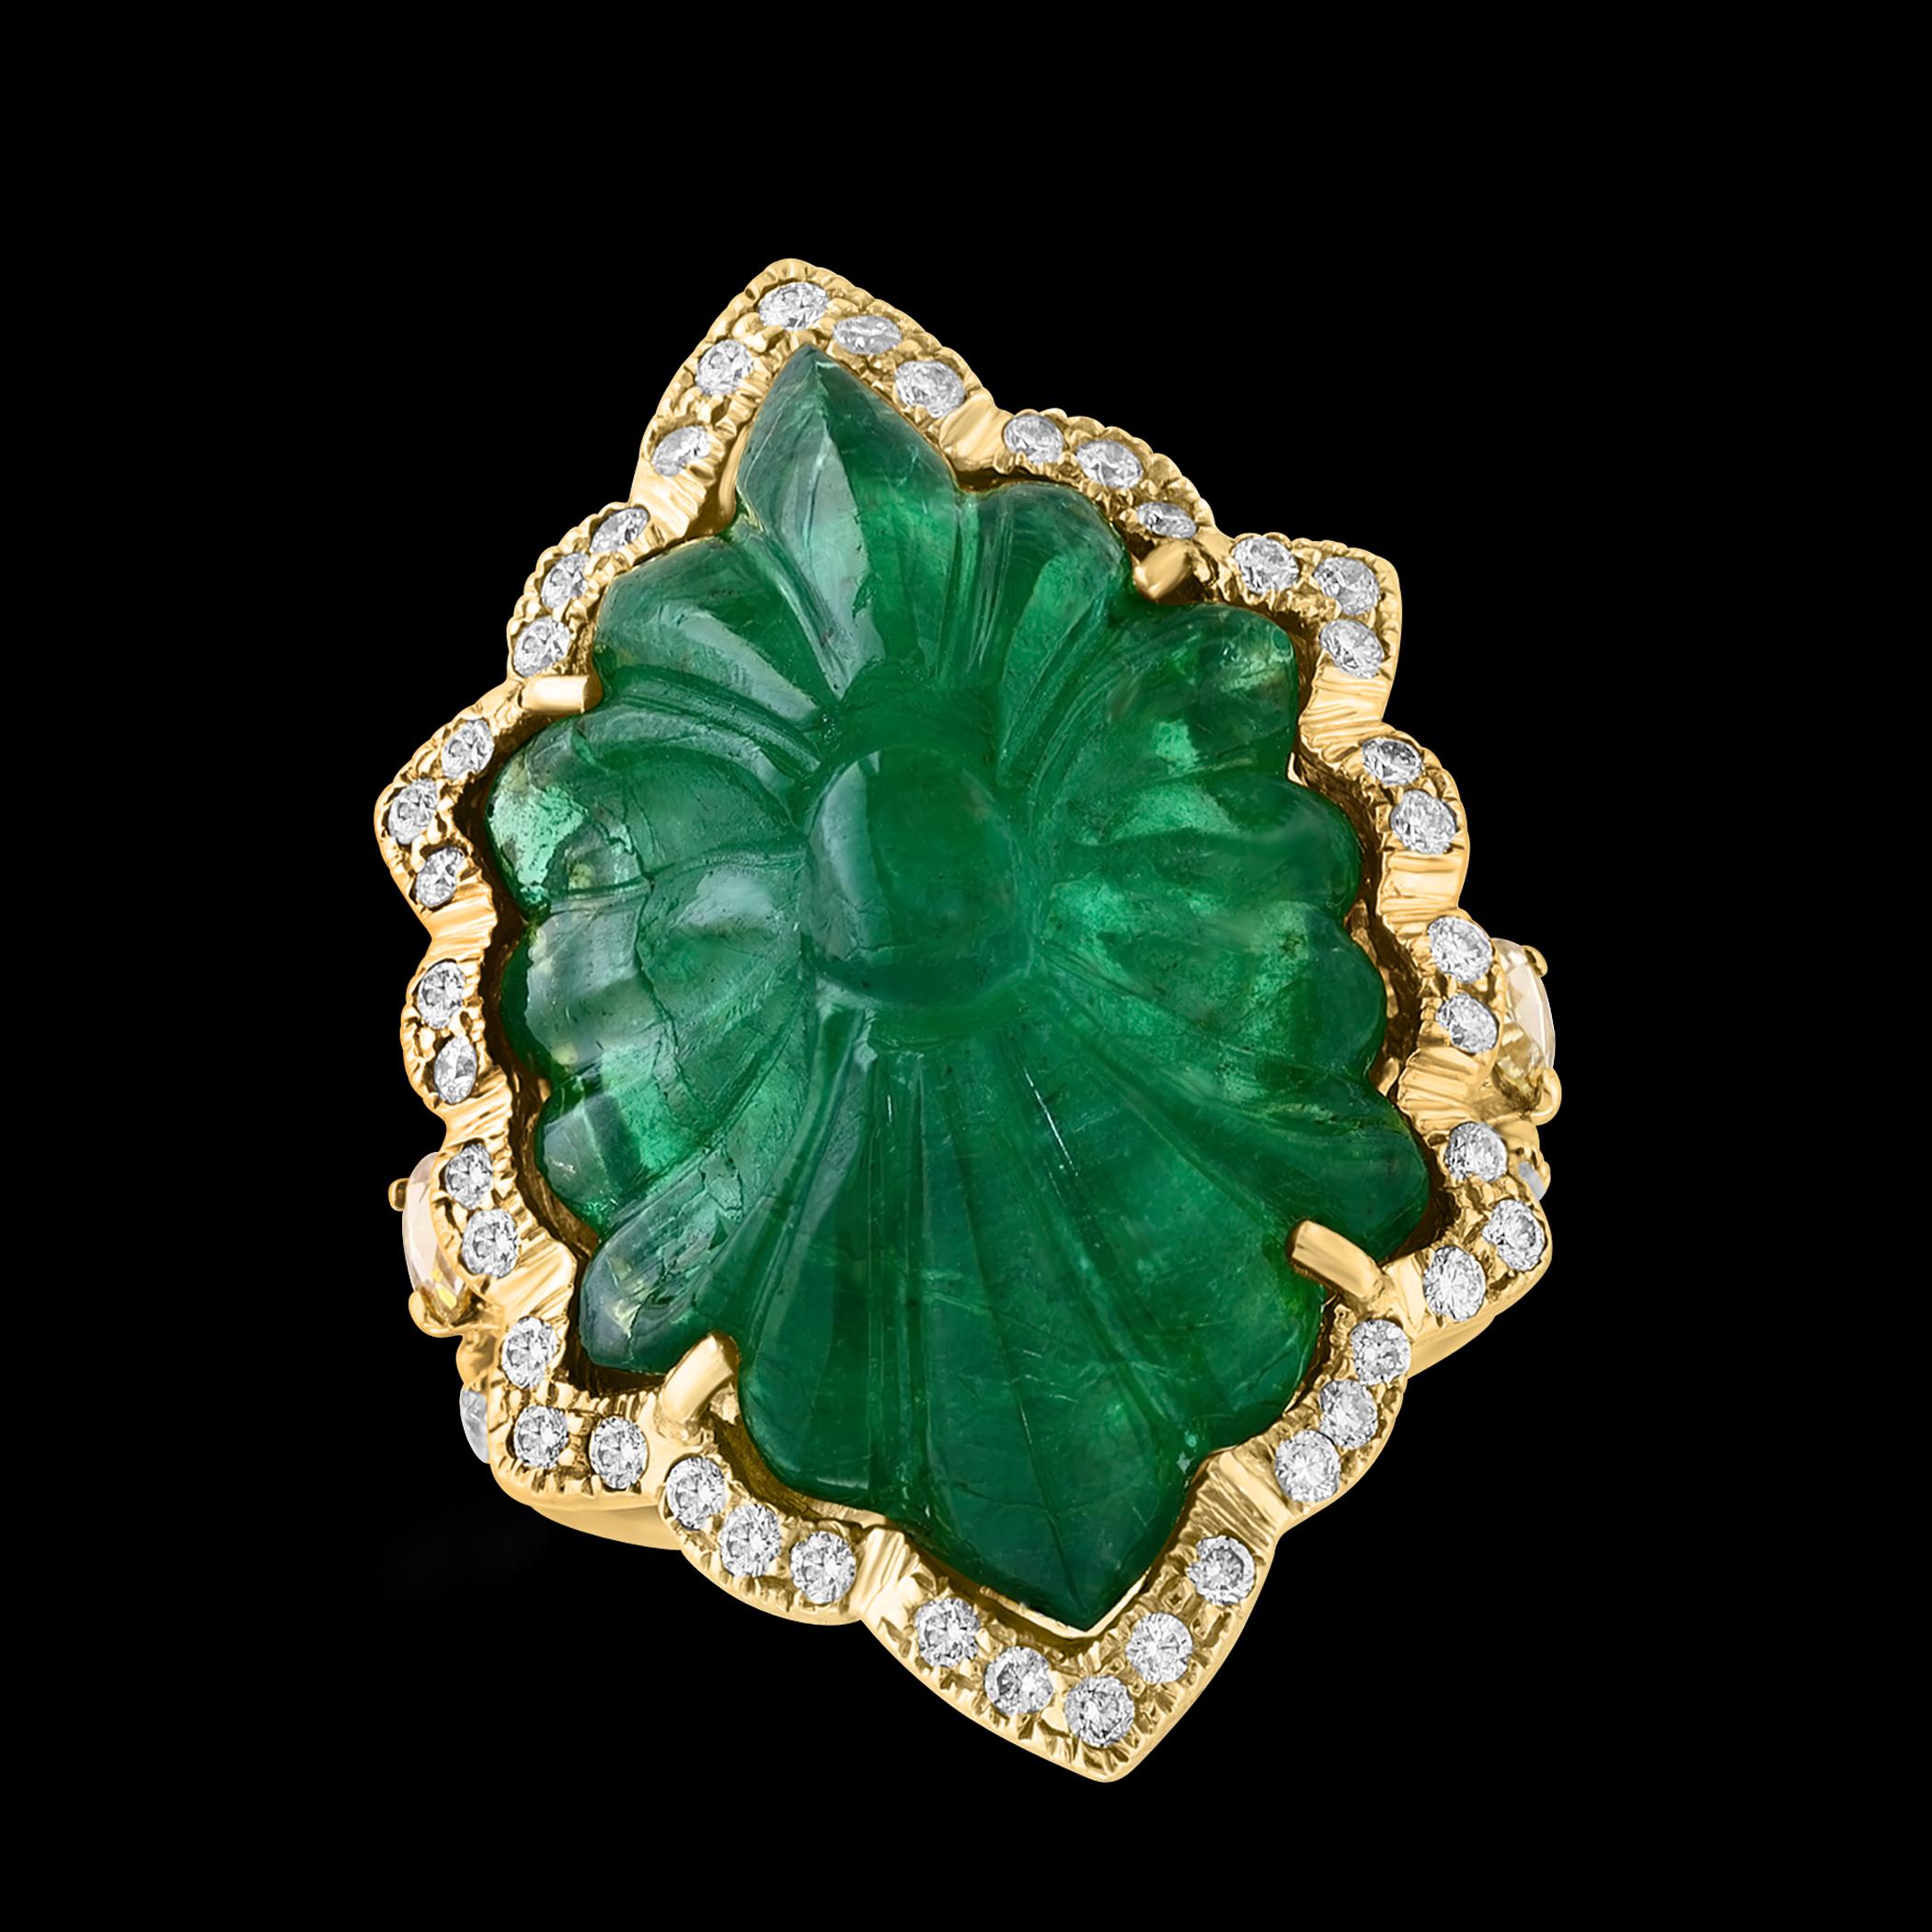 Vintage 12 Ct Natural Carved Emerald & 1.5 Ct Diamond Ring 18 Kt Yellow Gold In Excellent Condition For Sale In New York, NY